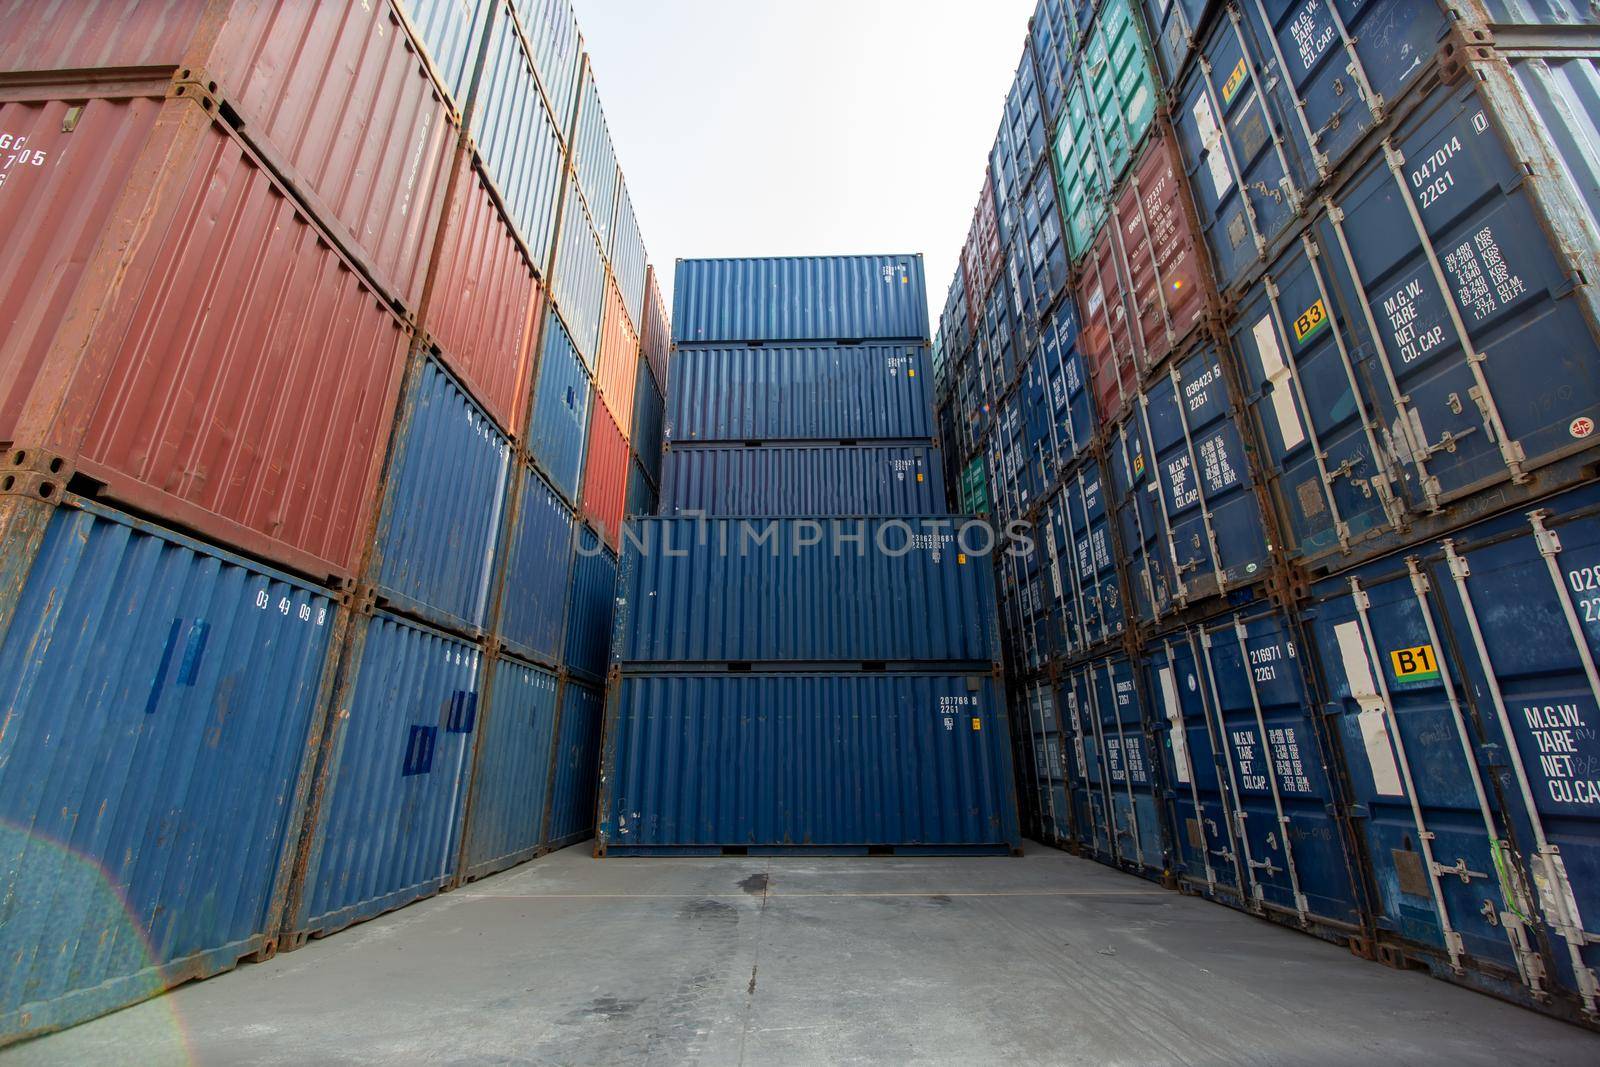 Containers box from Cargo at harbor.Foreman control Industrial Container Cargo freight ship at industry.Transportation and logistic concept. by chuanchai